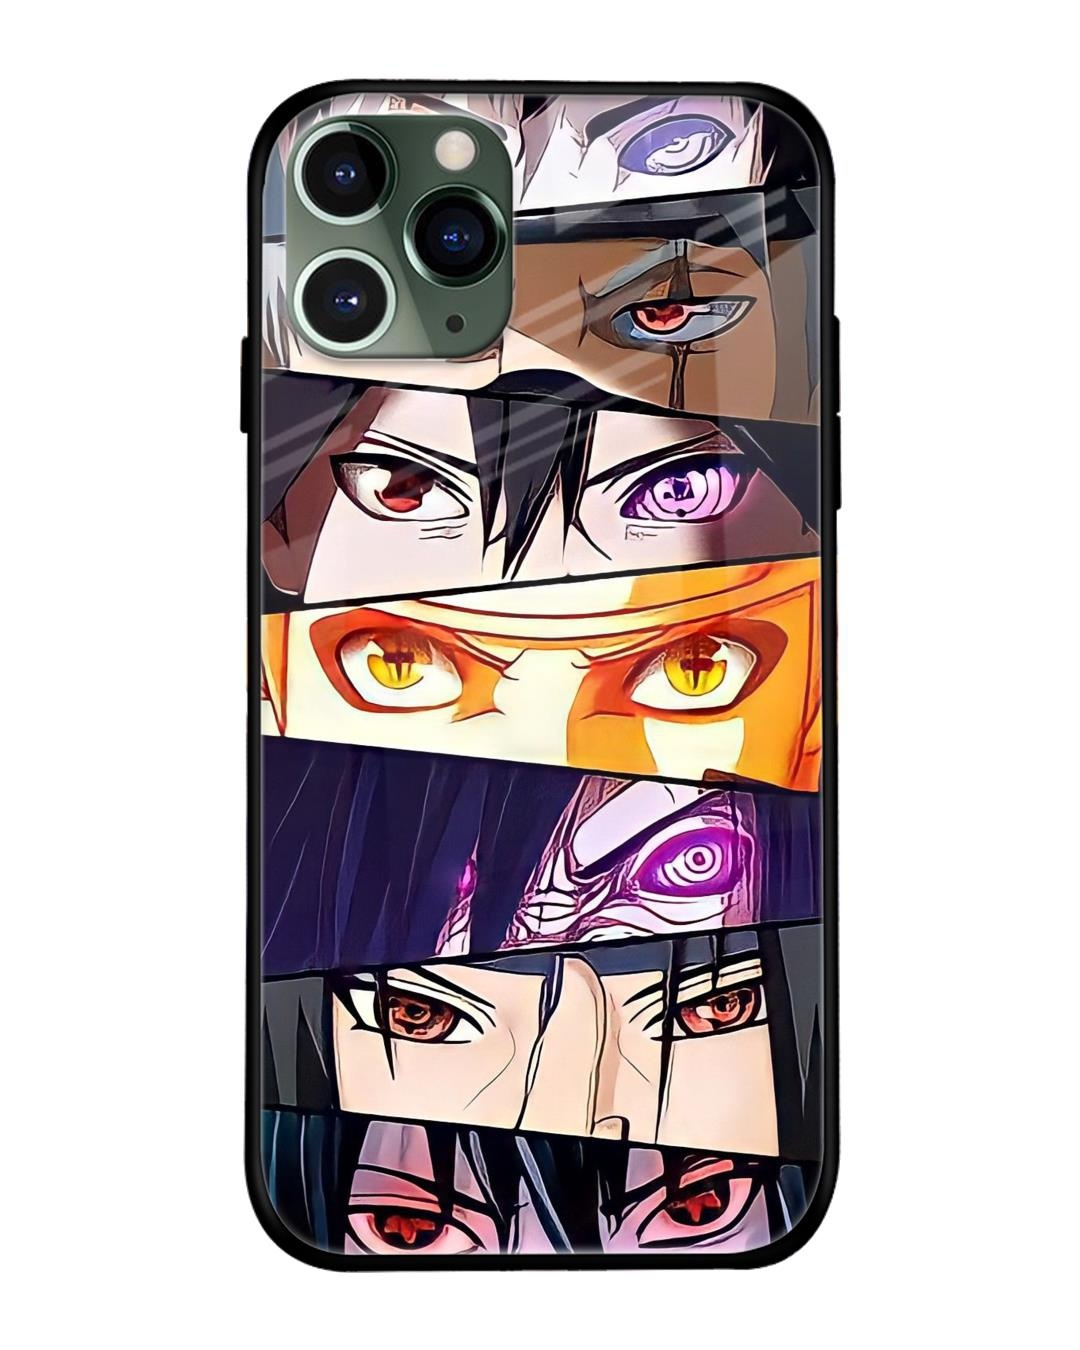 Anime Boy With Black Jacket Wallpaper iPhone 11 Pro Max Case